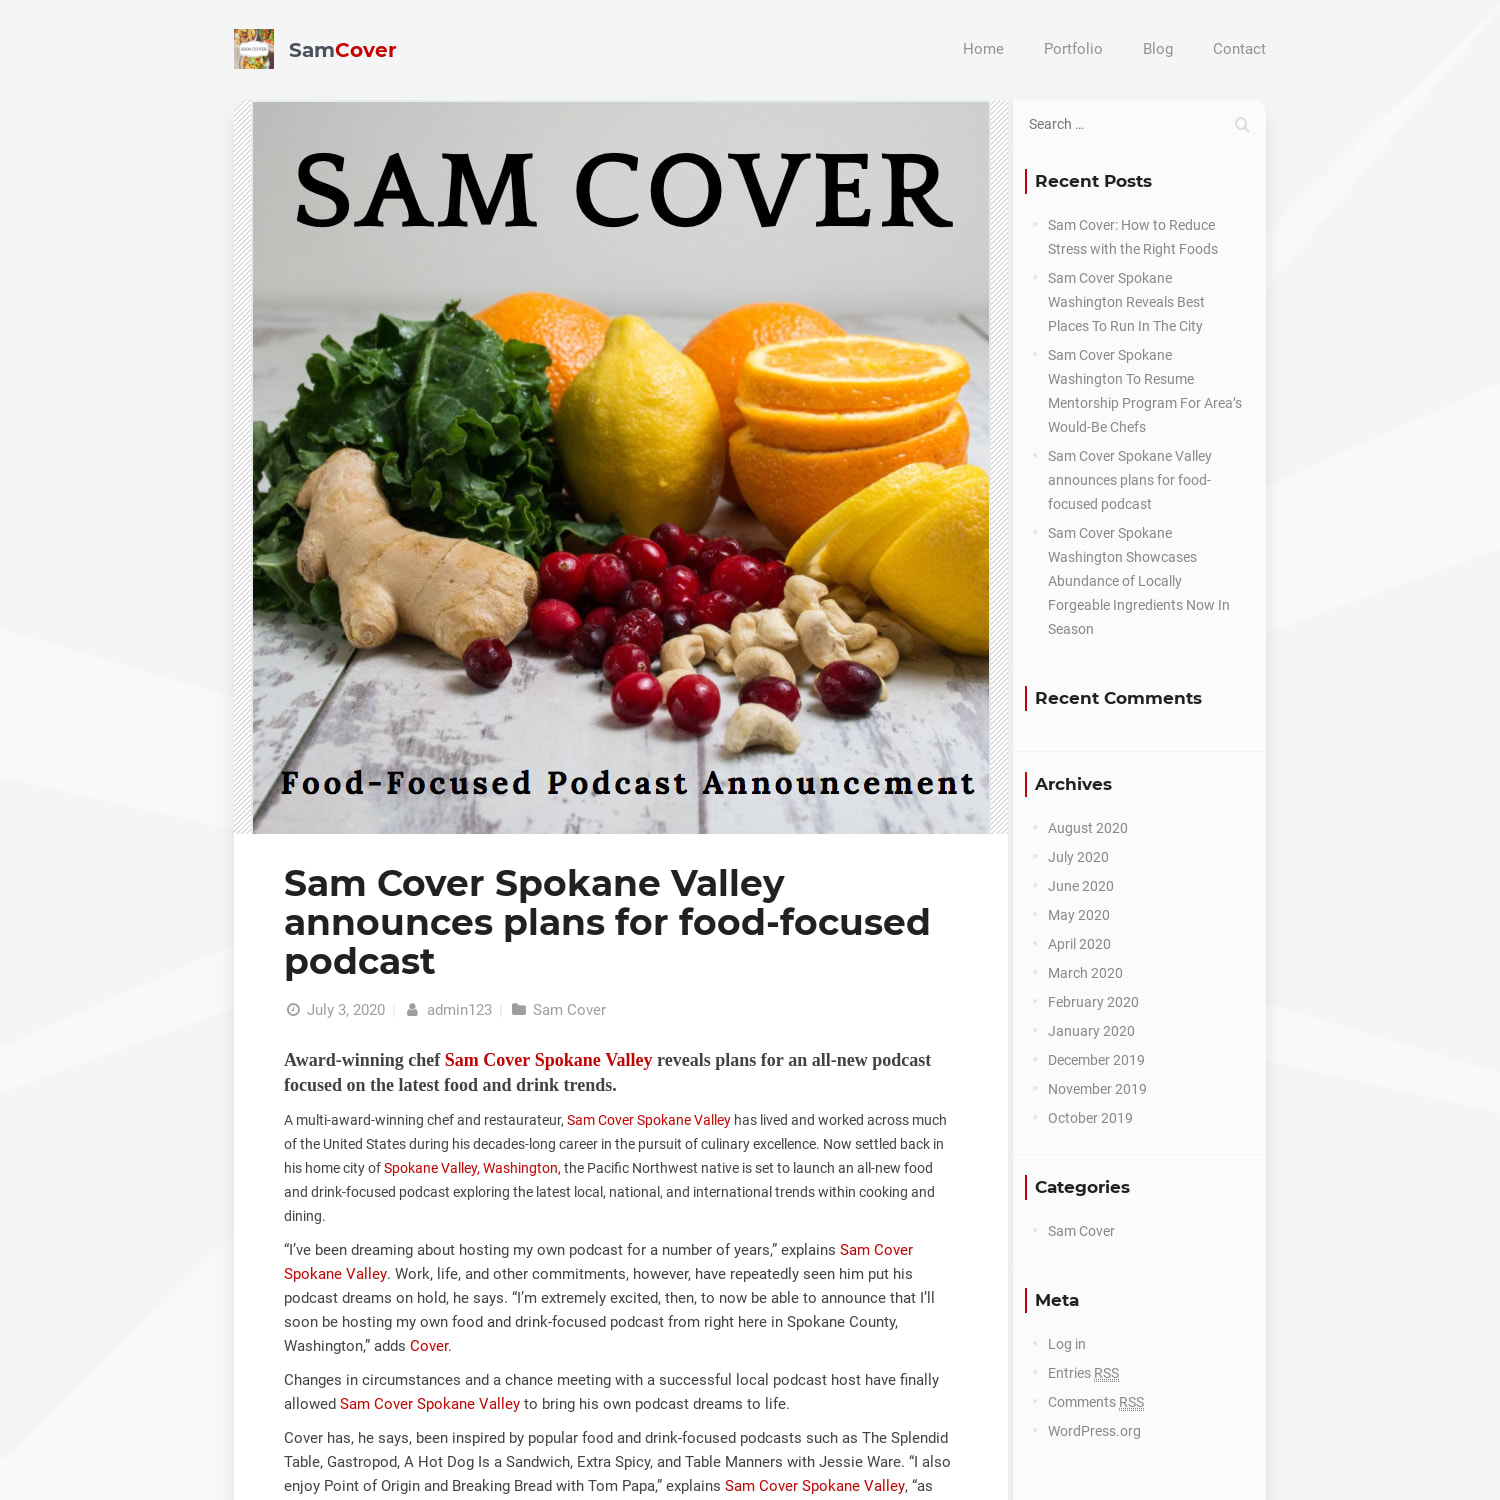 Sam Cover Spokane Valley announces plans for food-focused podcast